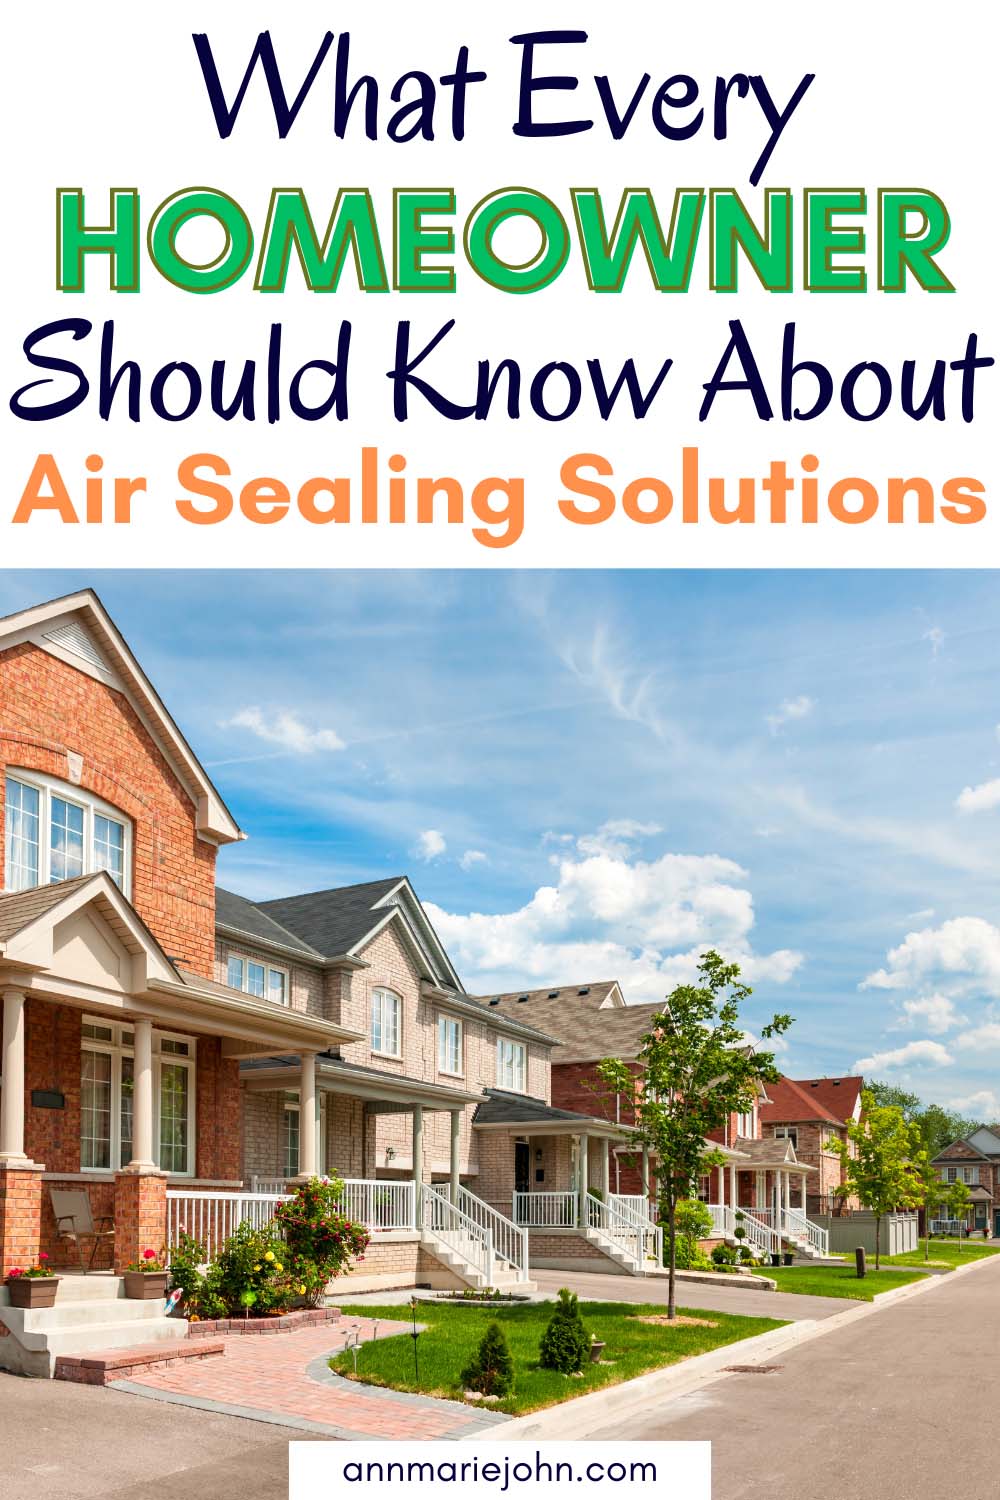 What Every Homeowner Should Understand About Air Sealing Solutions